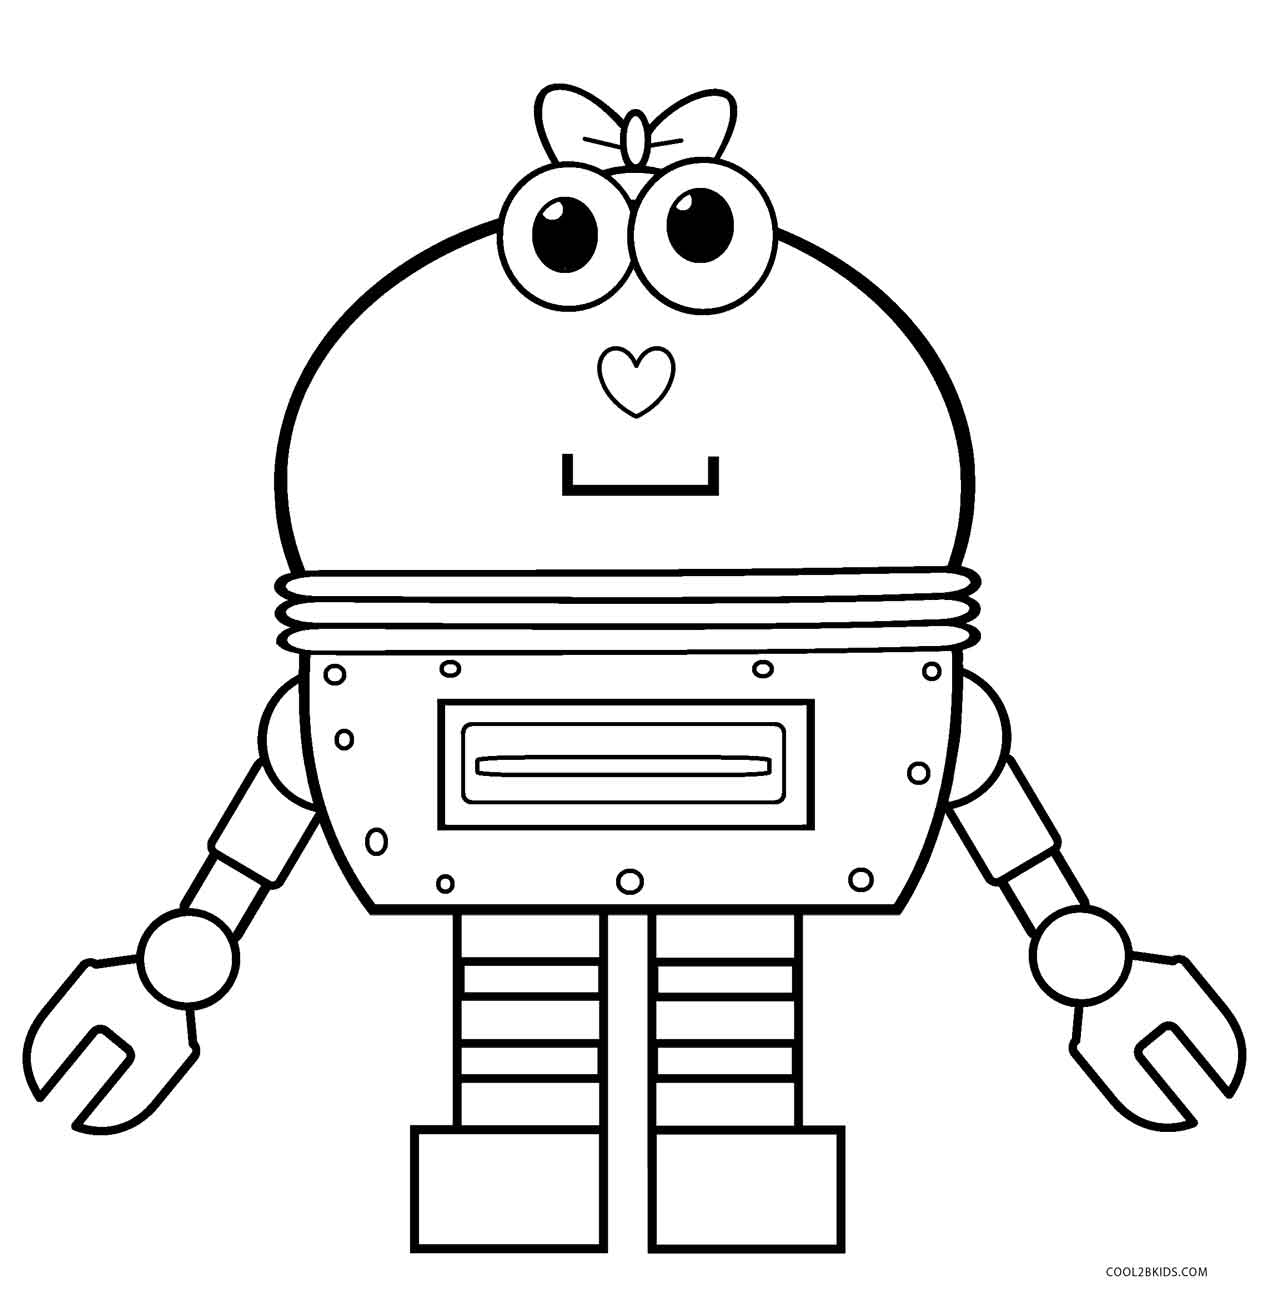 Printable Robot Coloring Pages - Customize and Print